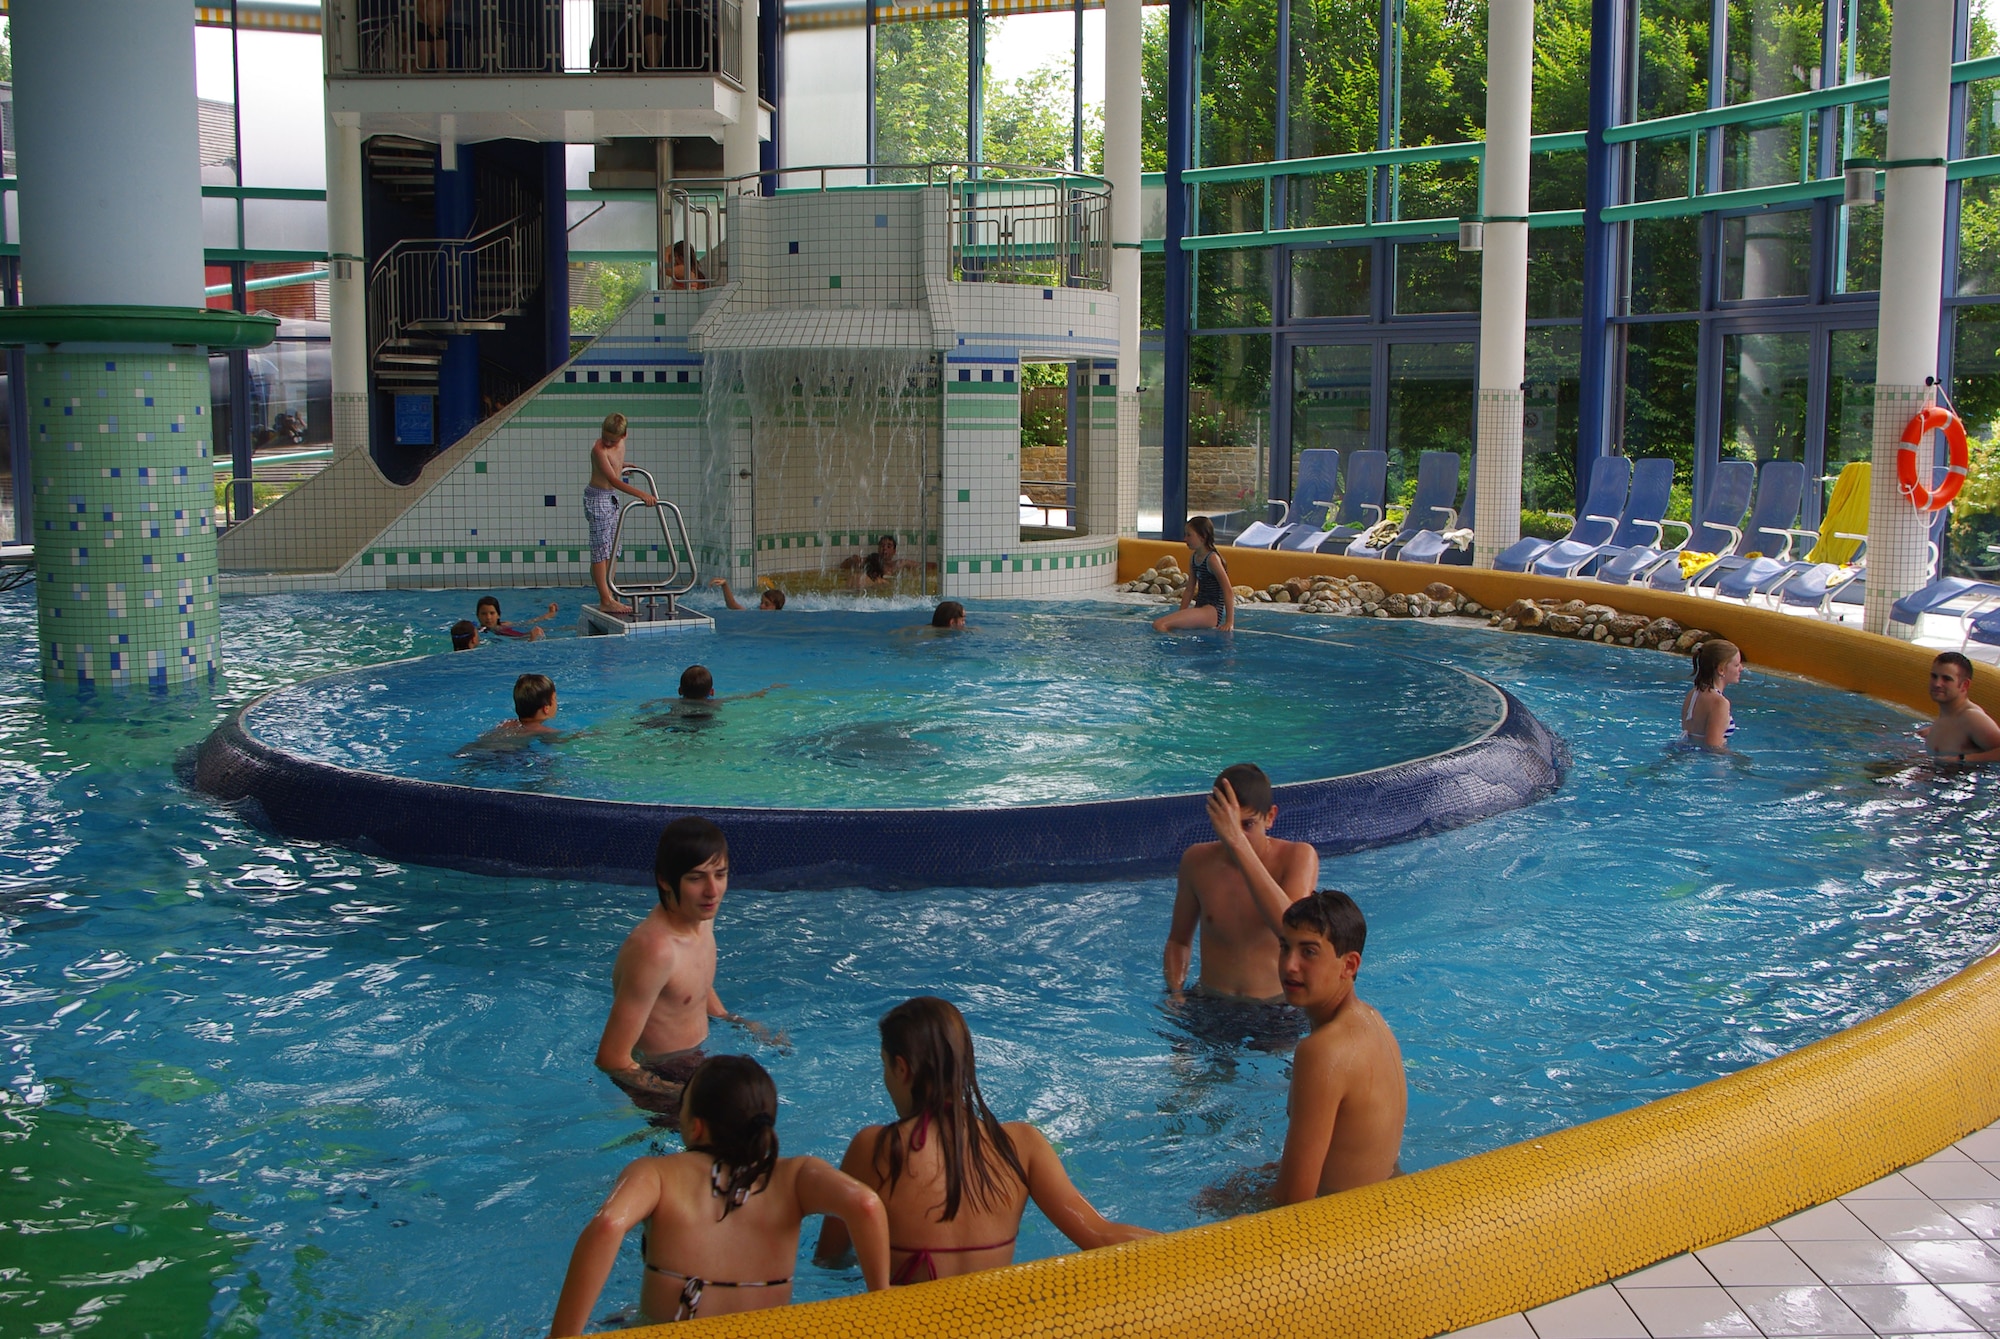 Beat the heat … cool off in Germany's outdoor pools > Spangdahlem